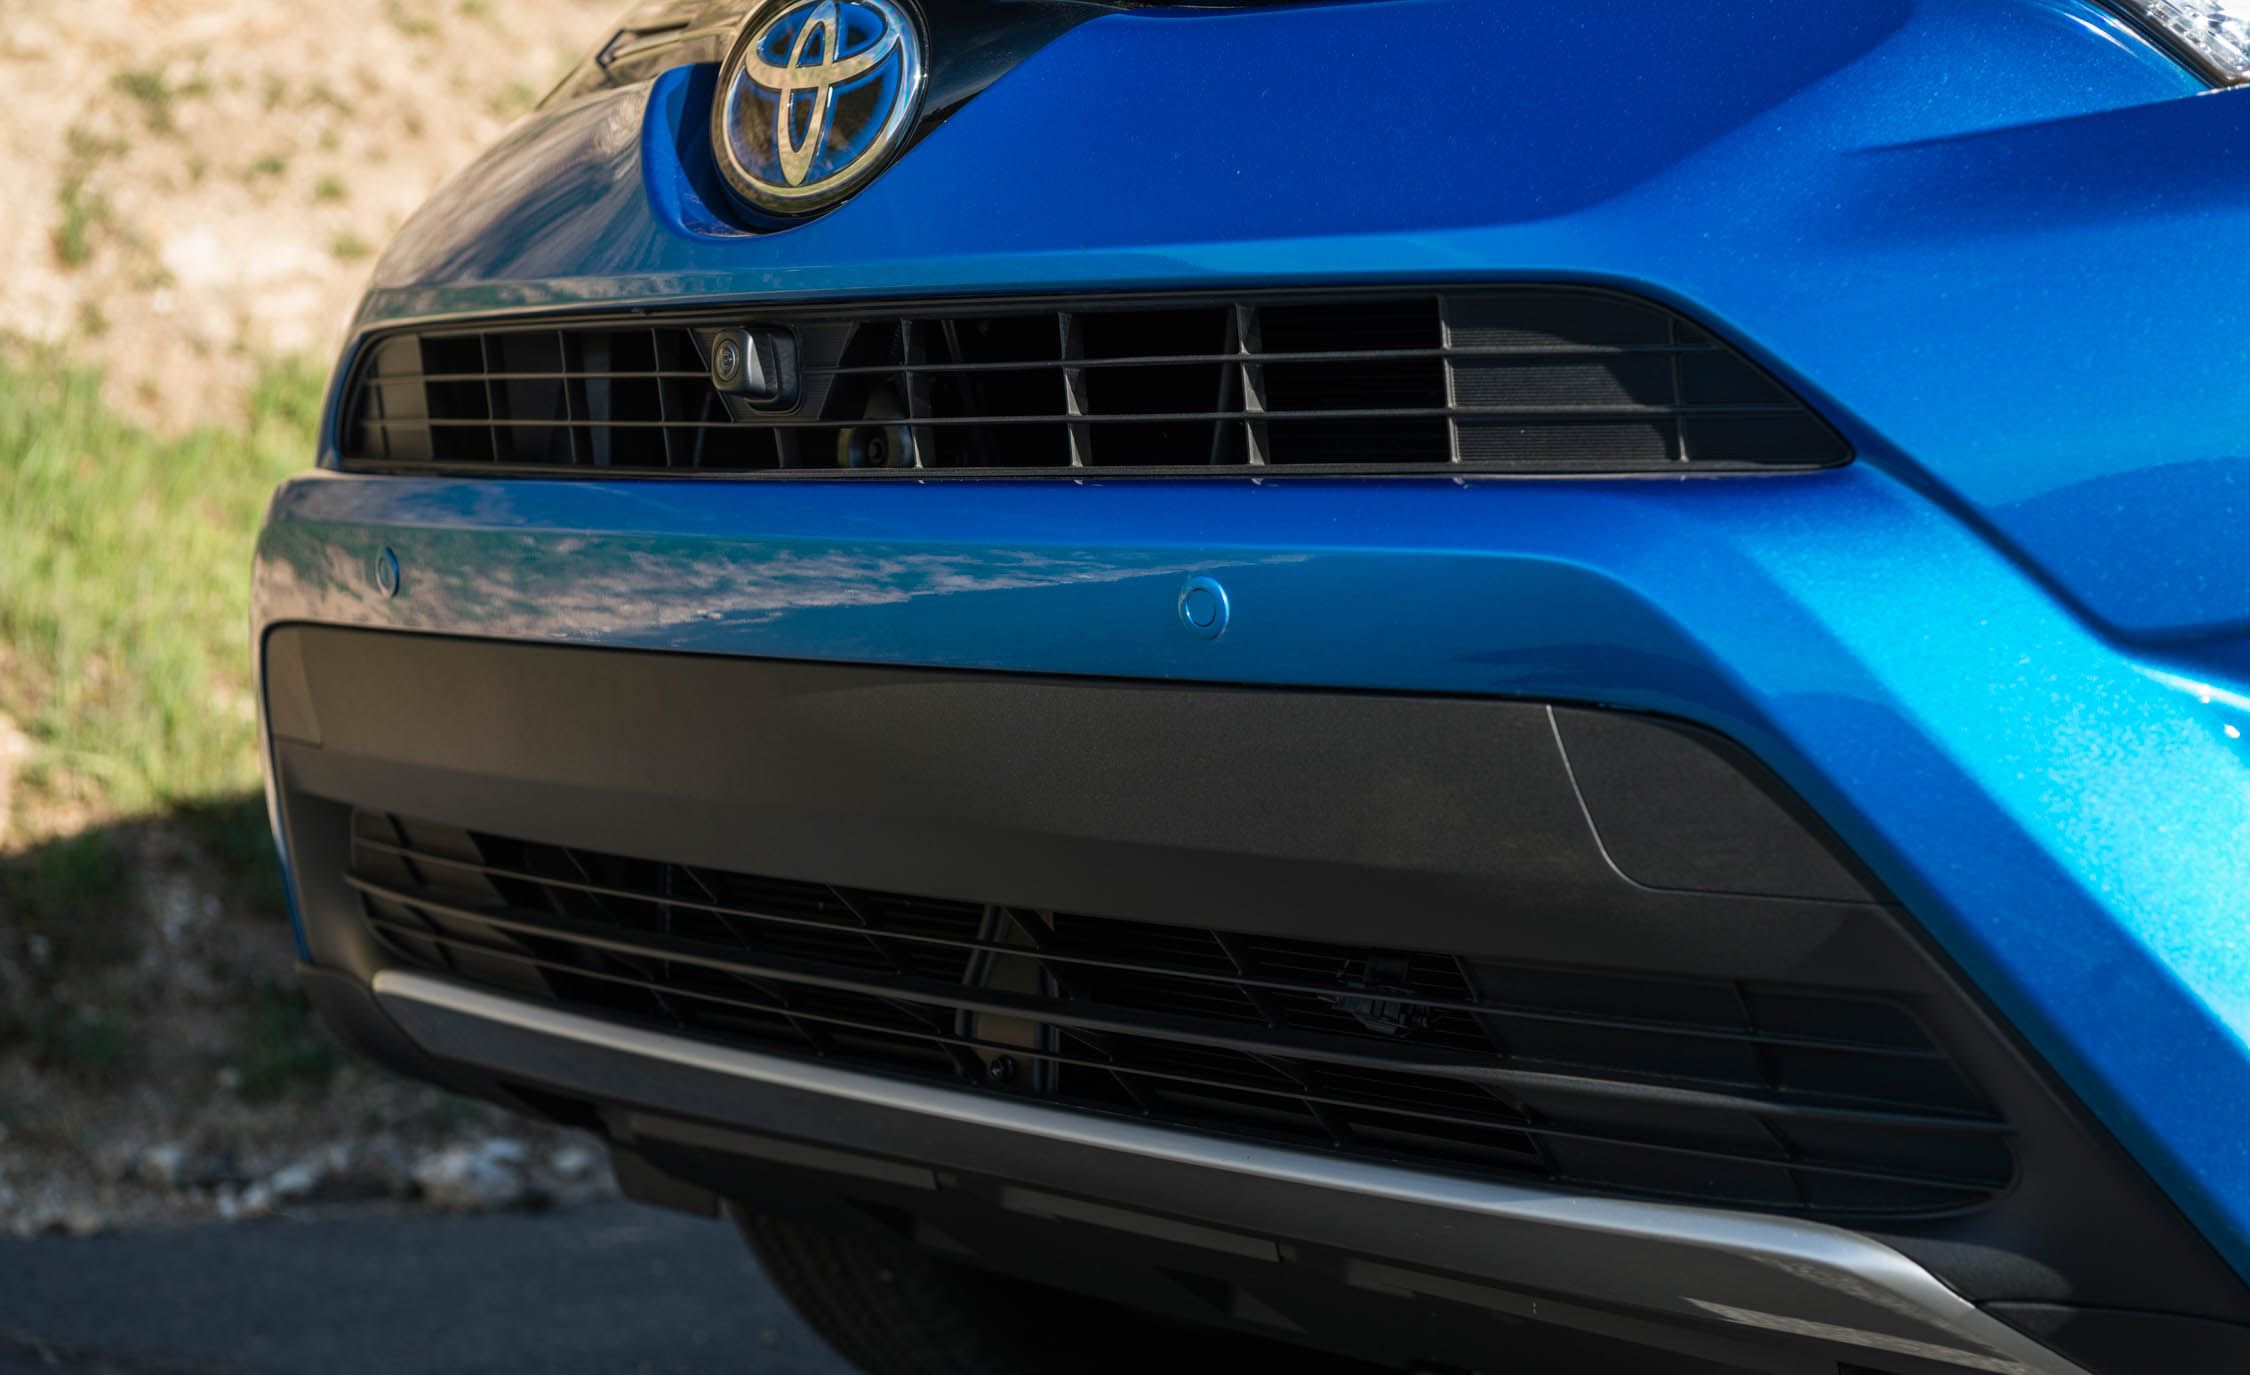 2016 Toyota Rav4 Hybrid Exterior Bumper And Grille (View 13 of 26)